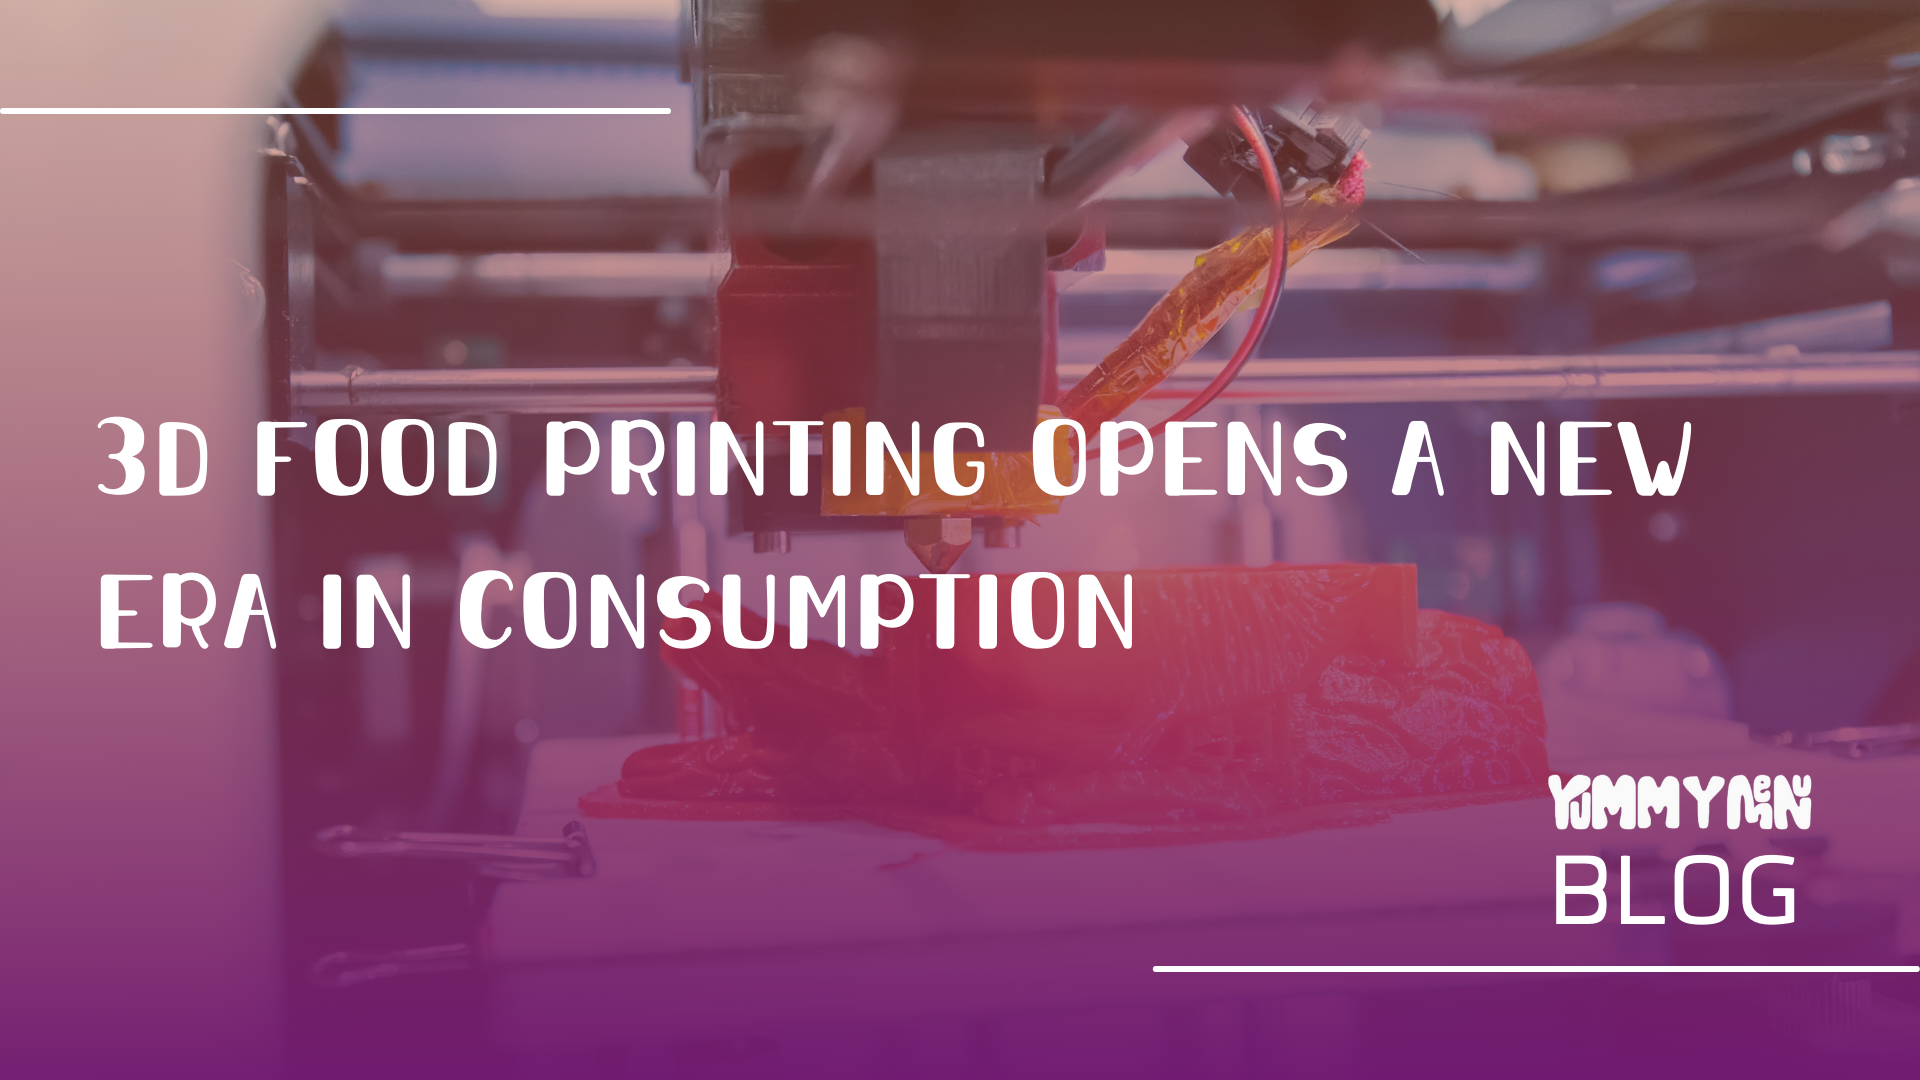 3D Food Printing Opens a New Era in Consumption